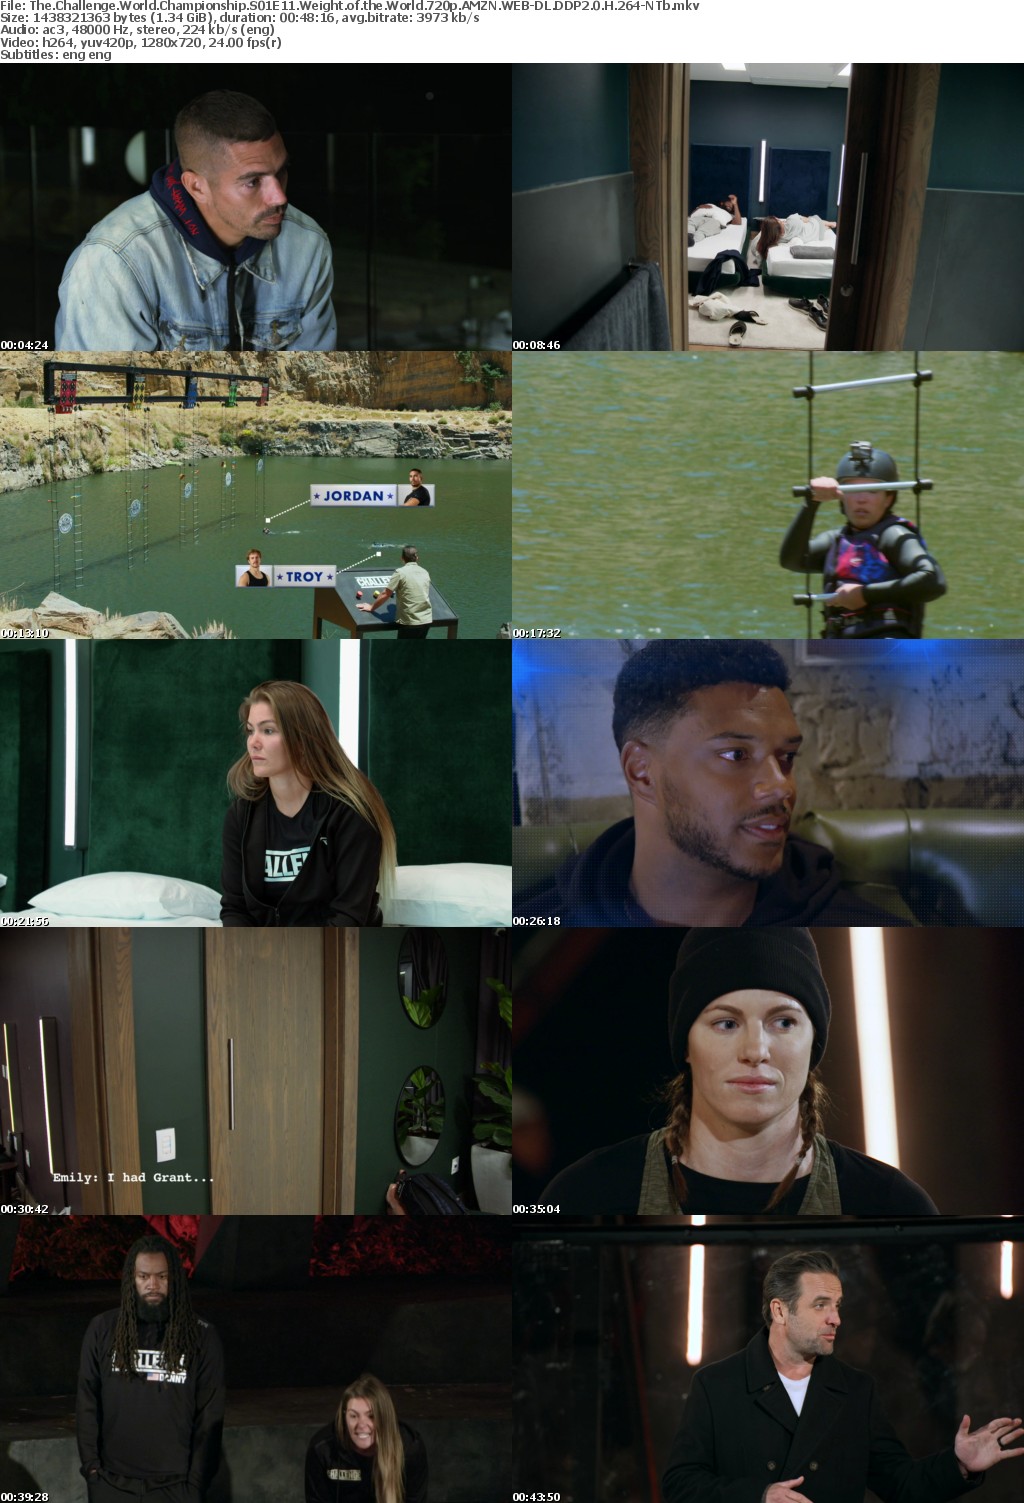 The Challenge World Championship S01E11 Weight of the World 720p AMZN WEBRip DDP2 0 x264-NTb